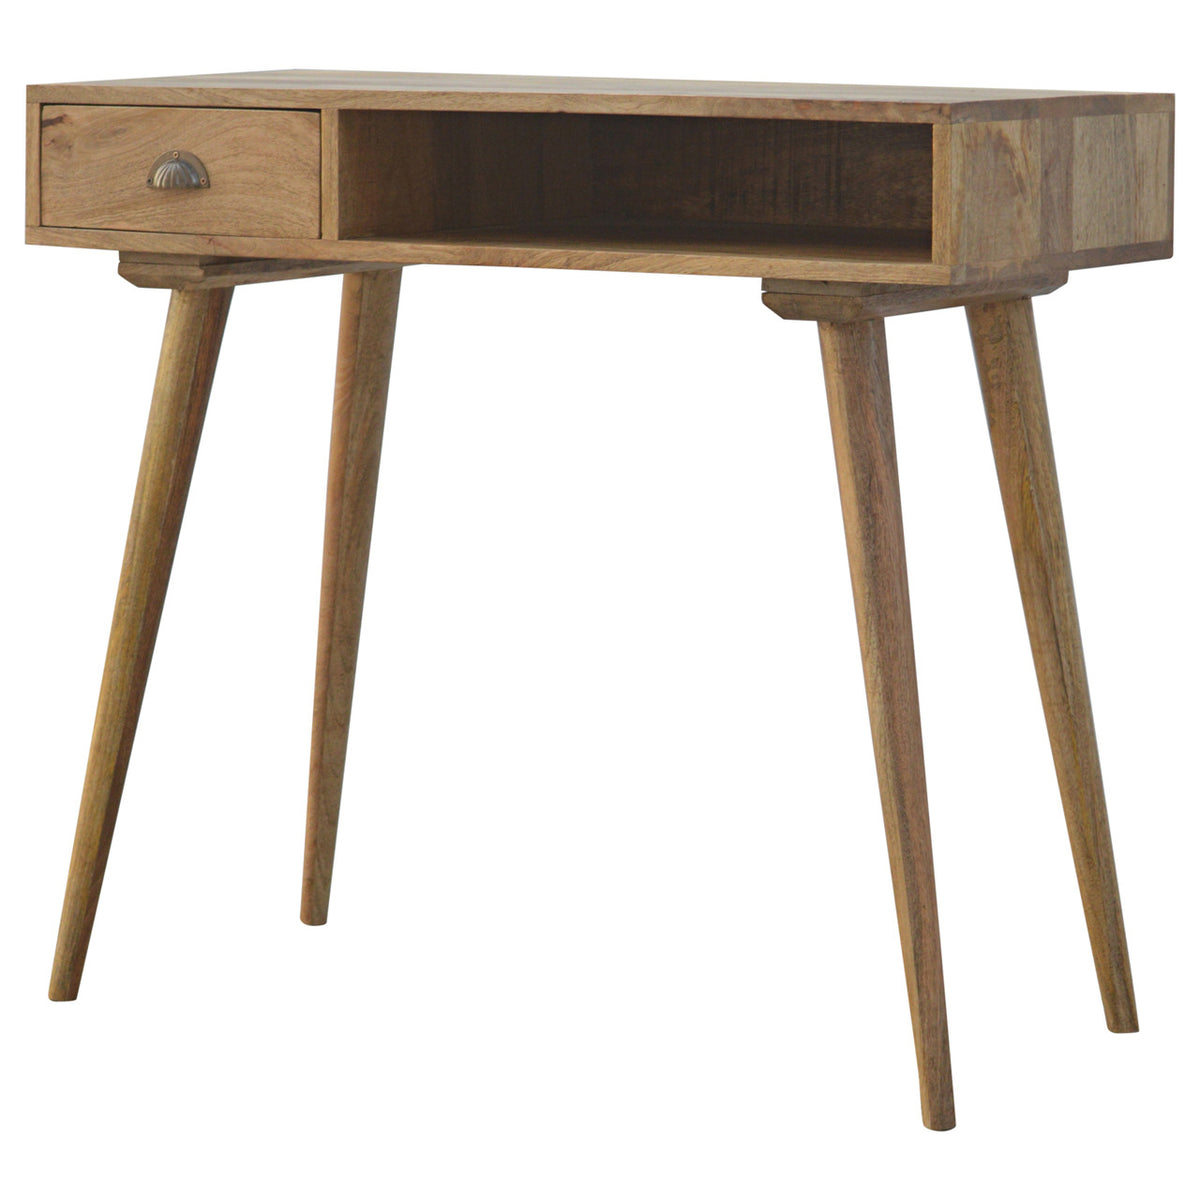 simple wooden desk with drawers plain wooden desk small buy solid wood desk with storage uk for sale good quality sturdy wooden desk small oak desk with a drawer small desk for studio home office desk for pc desk for laptop uk solid wood office desks near me solid wood desktop uk